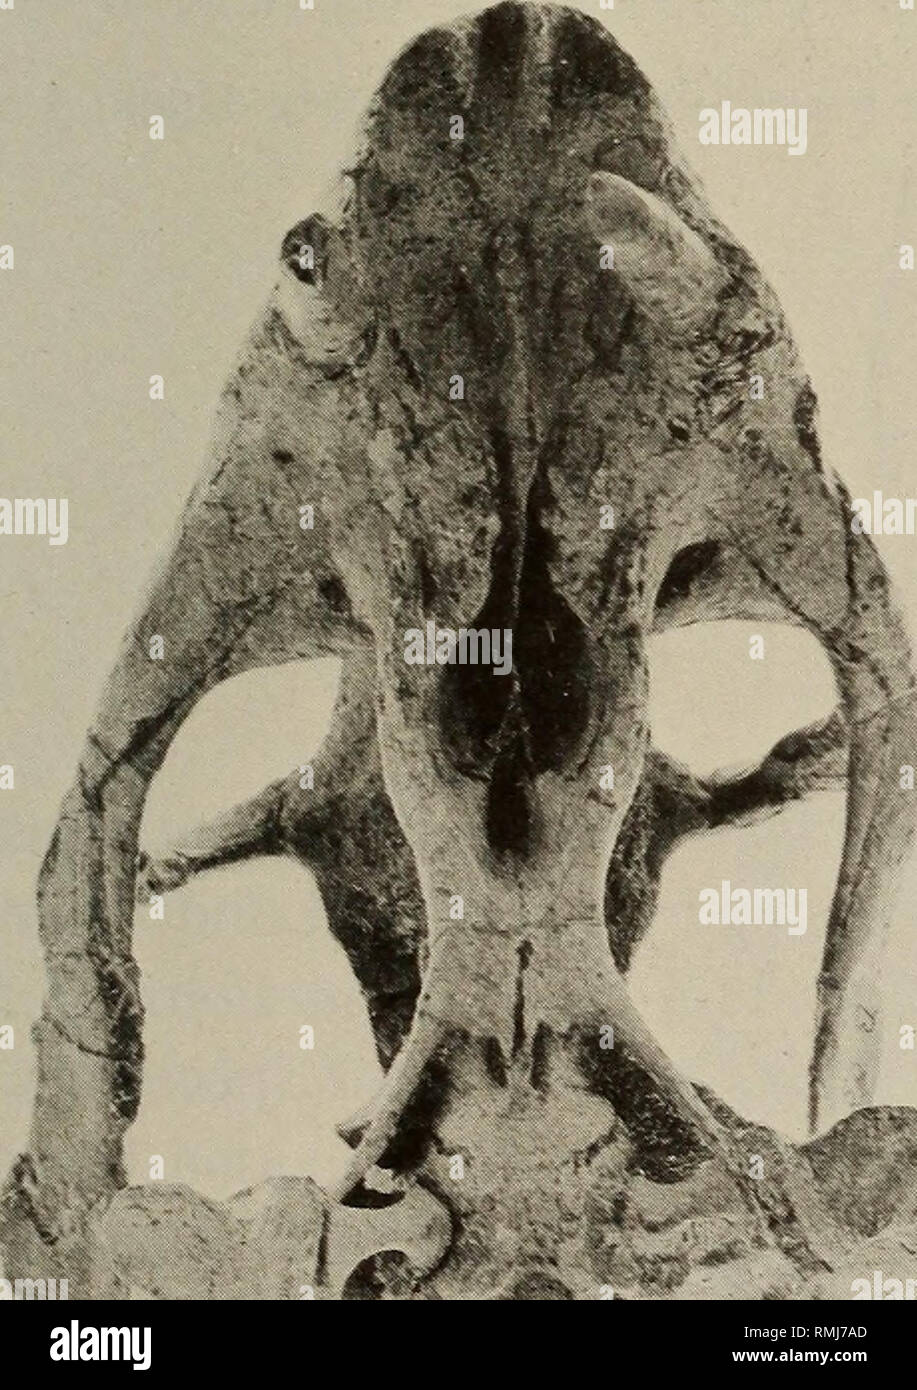 . Annals of the South African Museum = Annale van die Suid-Afrikaanse Museum. Natural history. THE GENERA DICYNODON AND DI1CTODON 107 smoothly with outer surface of snout, does not meet lacrimal. Low boss formed over external nares by nasals. Caniniform process of maxilla arises as ventral extension of palatal rim. Palatal rim sharp-edged, uninterrupted by notch. Palatal portion of palatine large, makes short contact with premaxilla. Vomers form long, narrow septum in interpterygoid fossa, interpterygoid vacuity short. Ectopterygoid small, displaced laterally. Labial fossa present between maxi Stock Photo